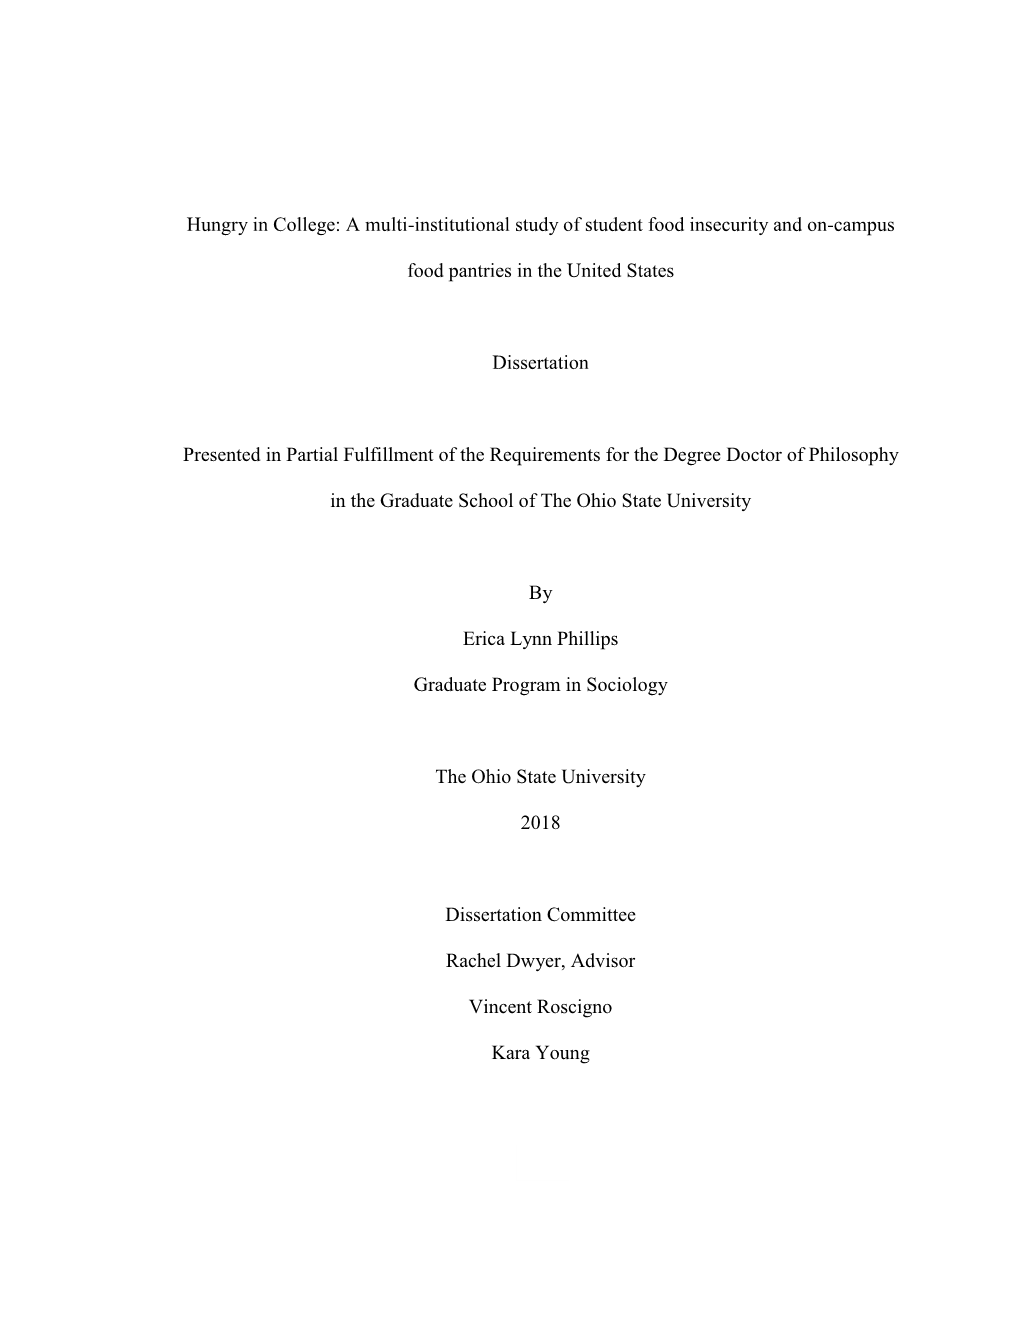 Hungry in College: a Multi-Institutional Study of Student Food Insecurity and On-Campus